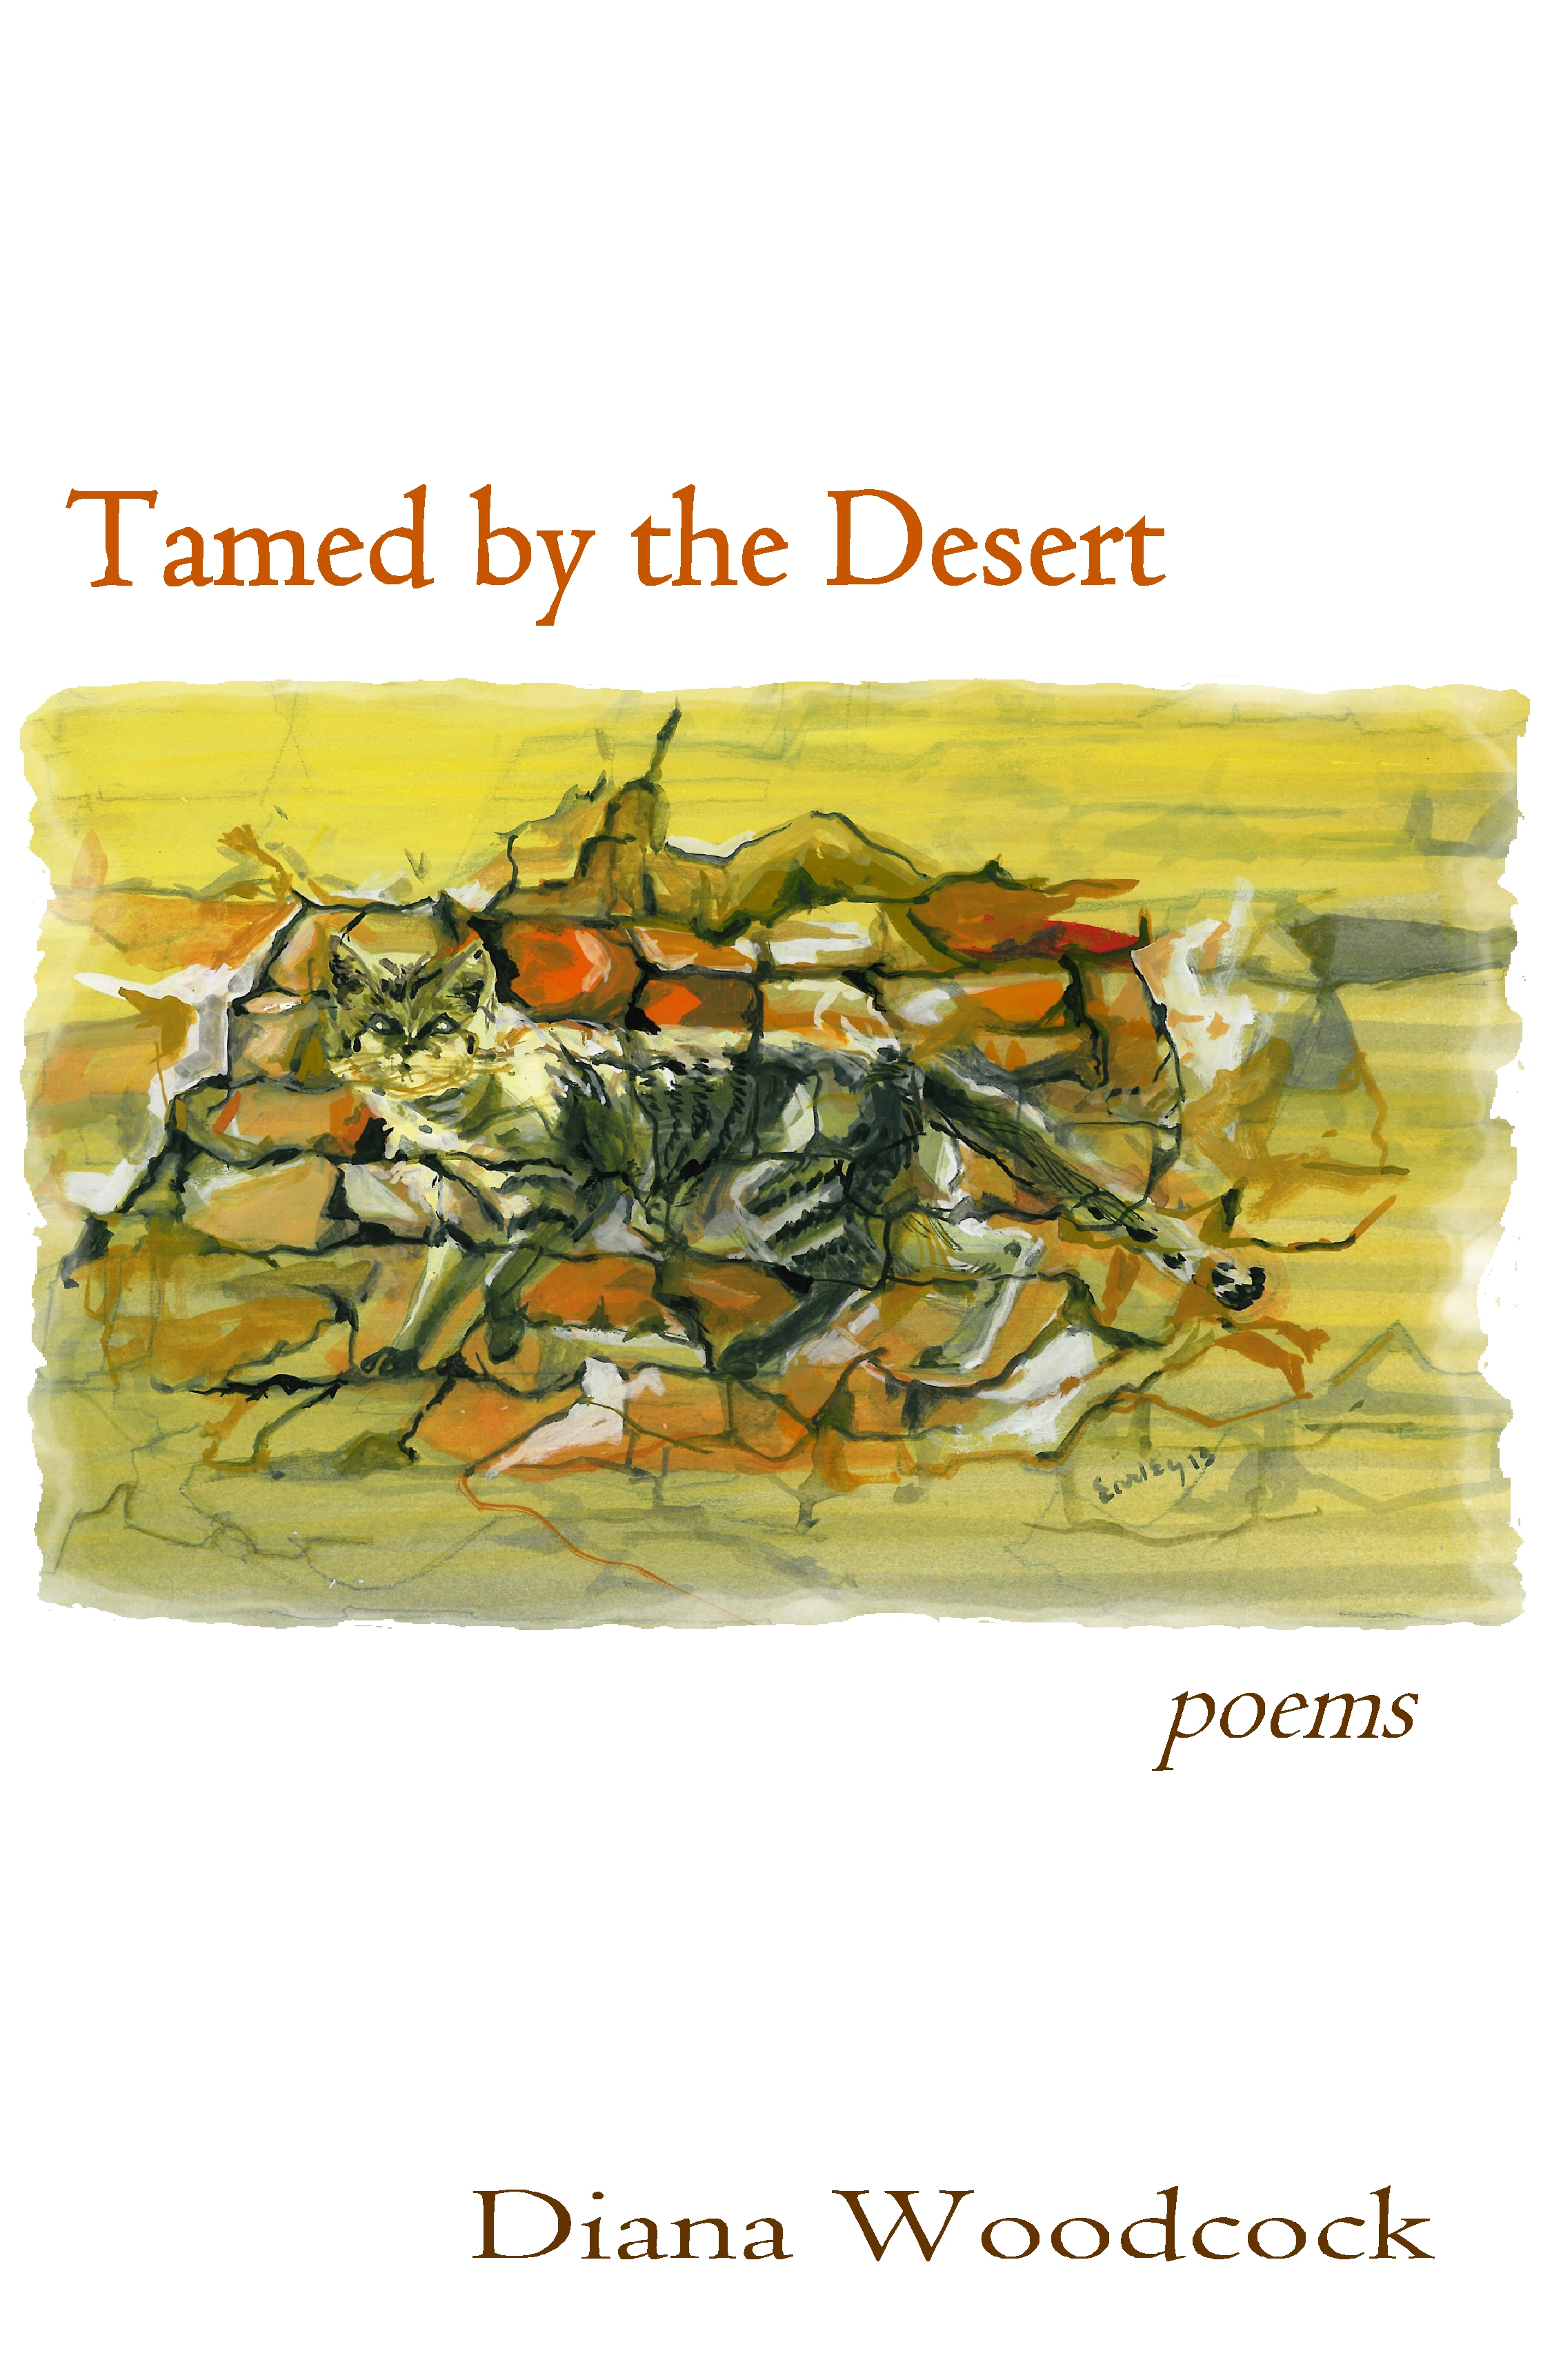 Book cover of TAMED BY THE DESERT by Dr. Diana Woodcock.